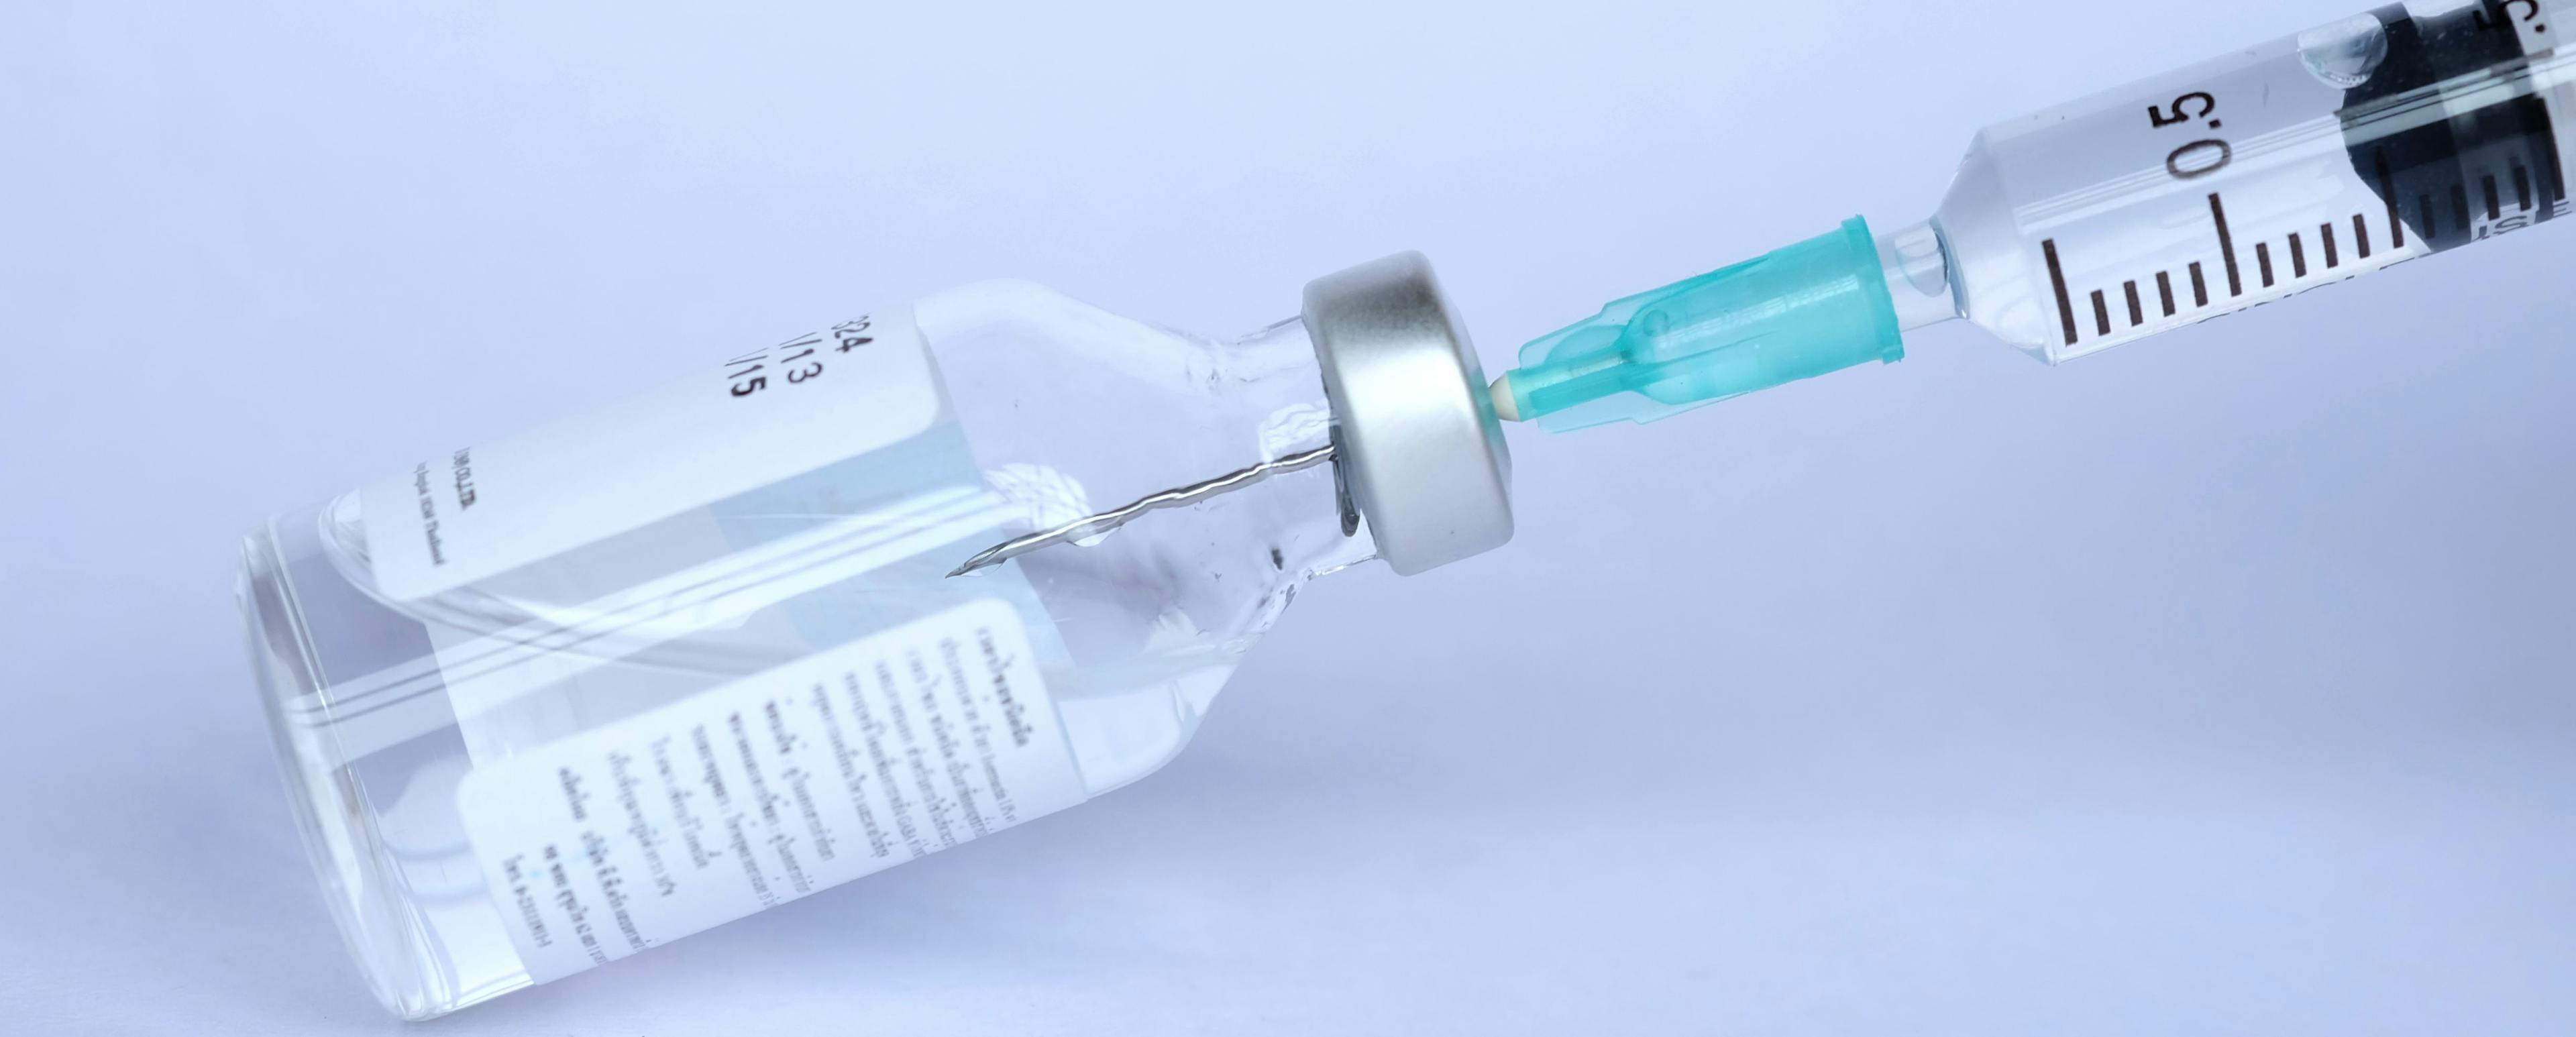 Generic Injectable Drugs Launched by Teva